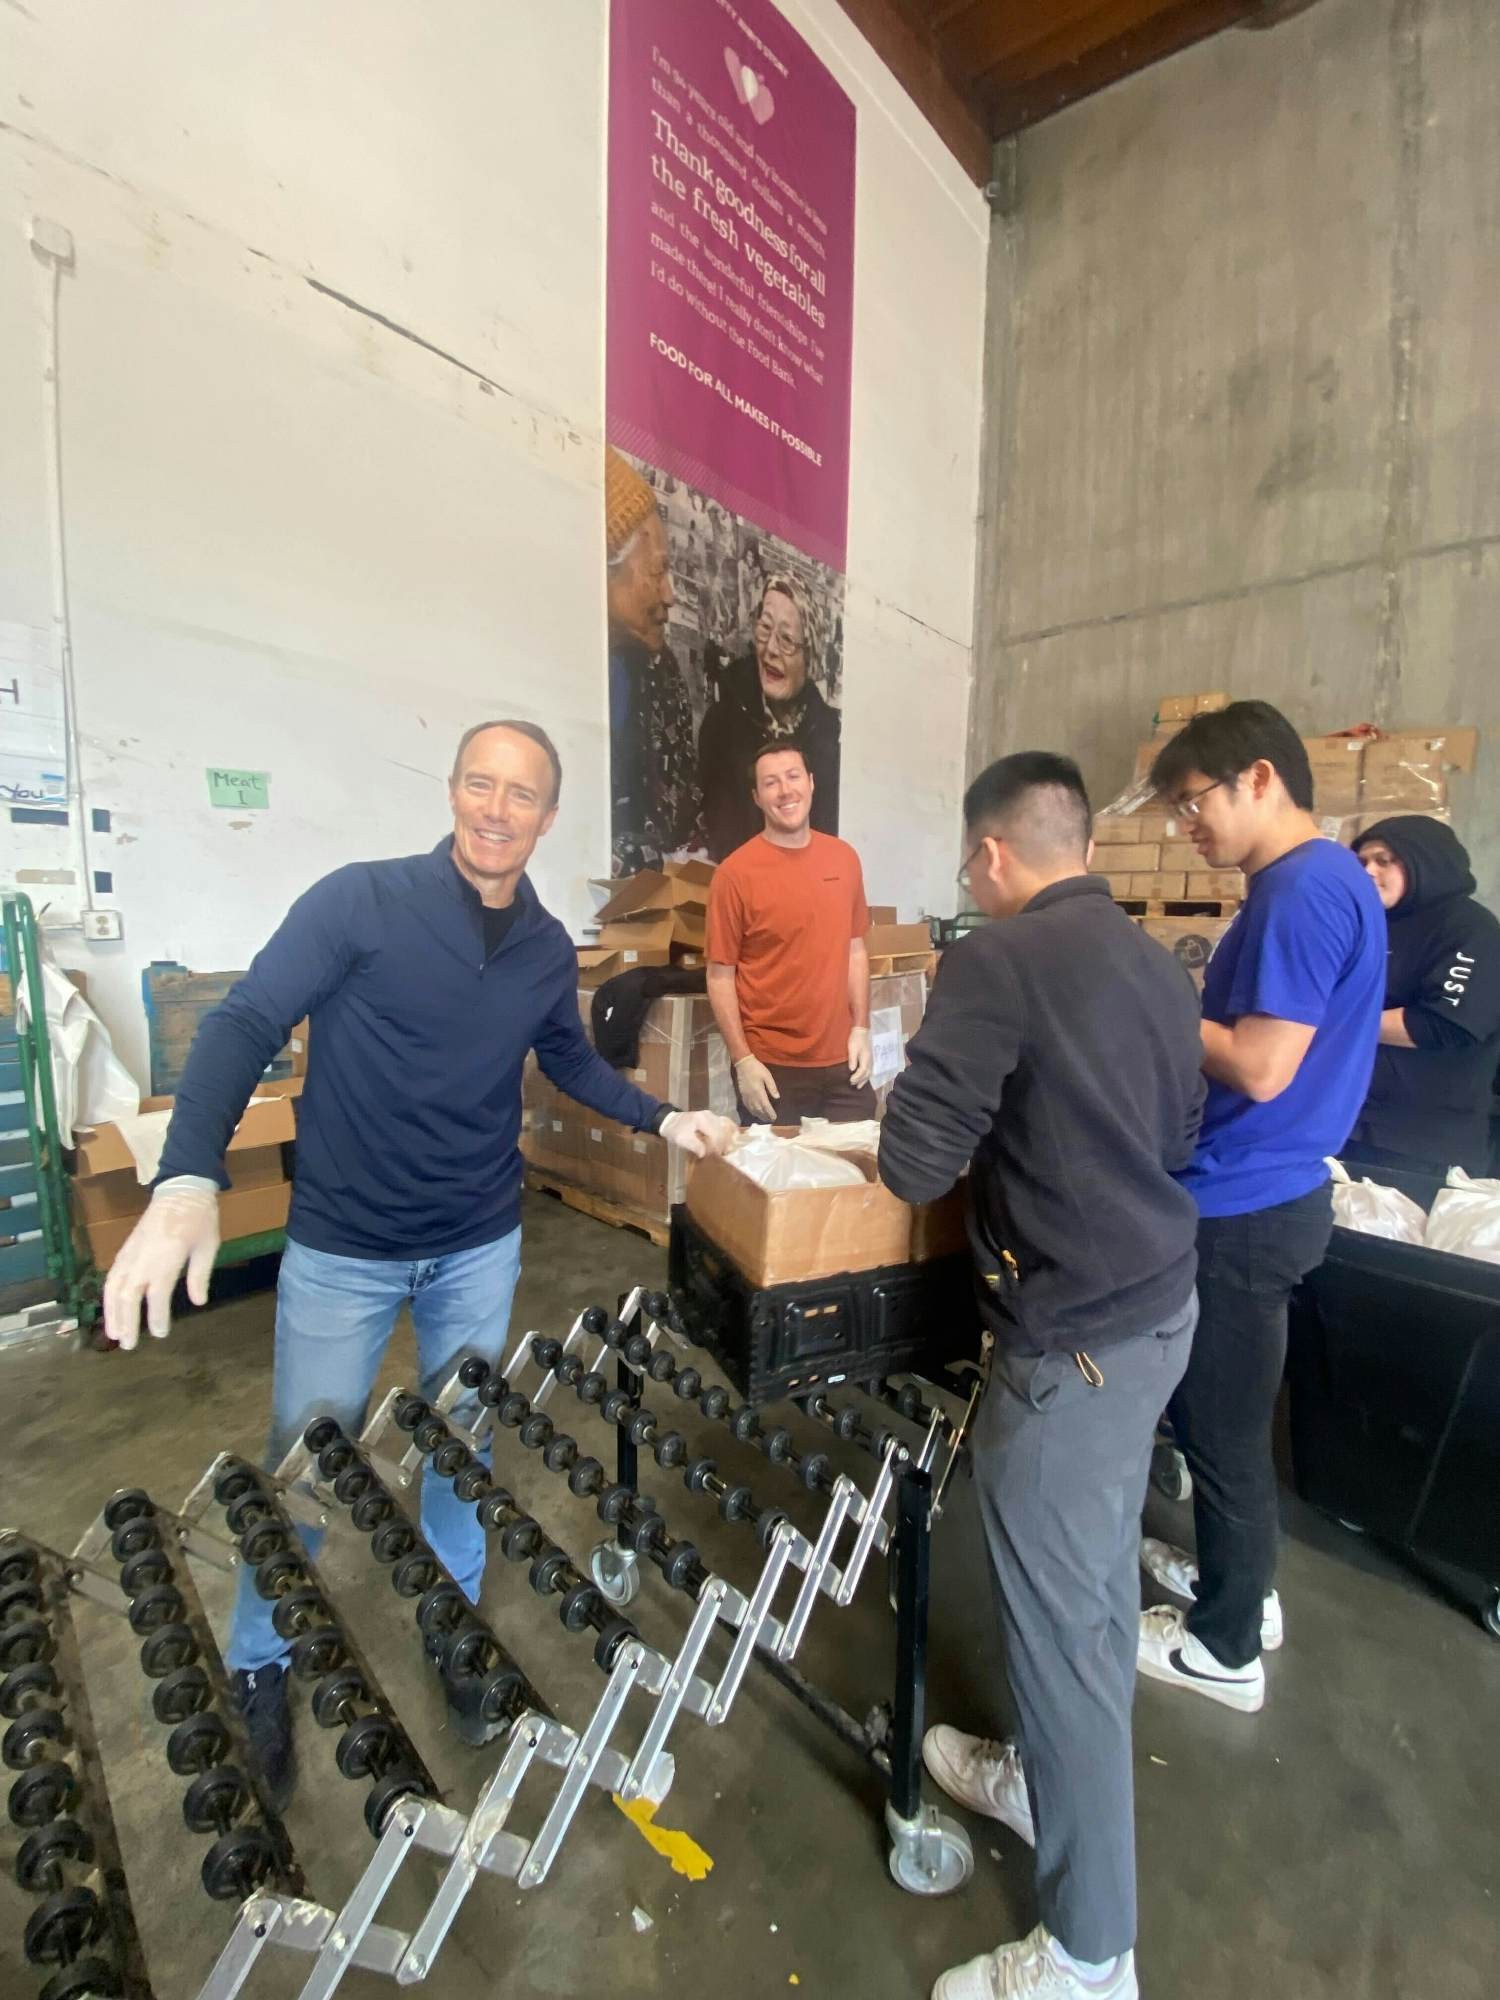 Bay Area employees volunteering at the local food bank during our annual Volunteer Week